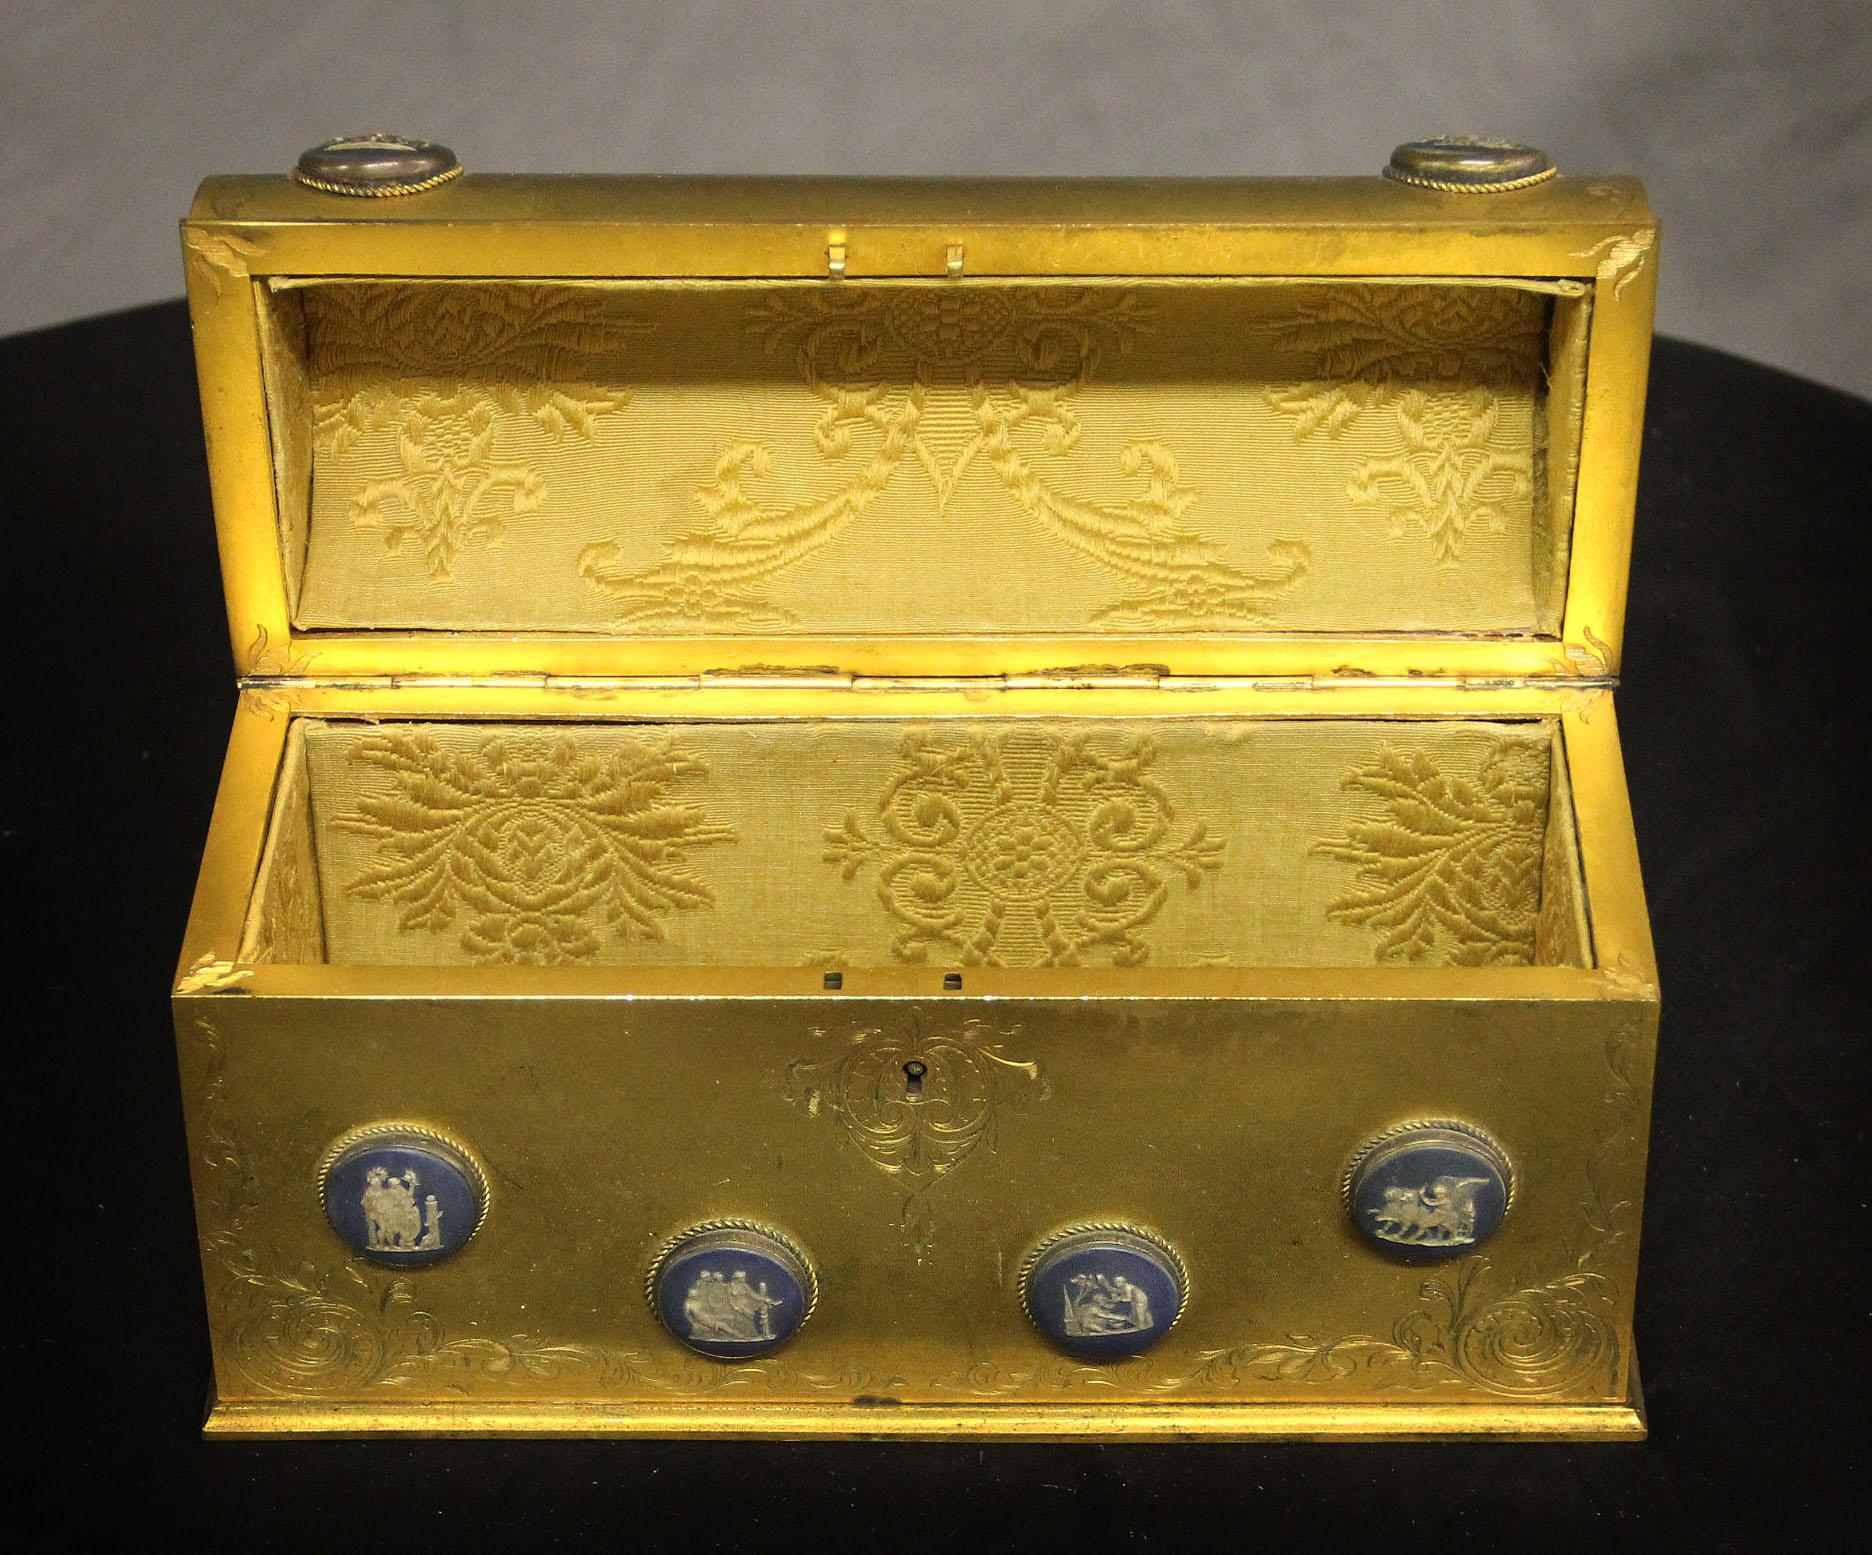 Late 19th century gilt bronze and Wedgwood style porcelain etched jewelry box

The etched gilded box mounted with twelve blue porcelain plaques depicting different classical scenes, the top opens to a fabric interior.